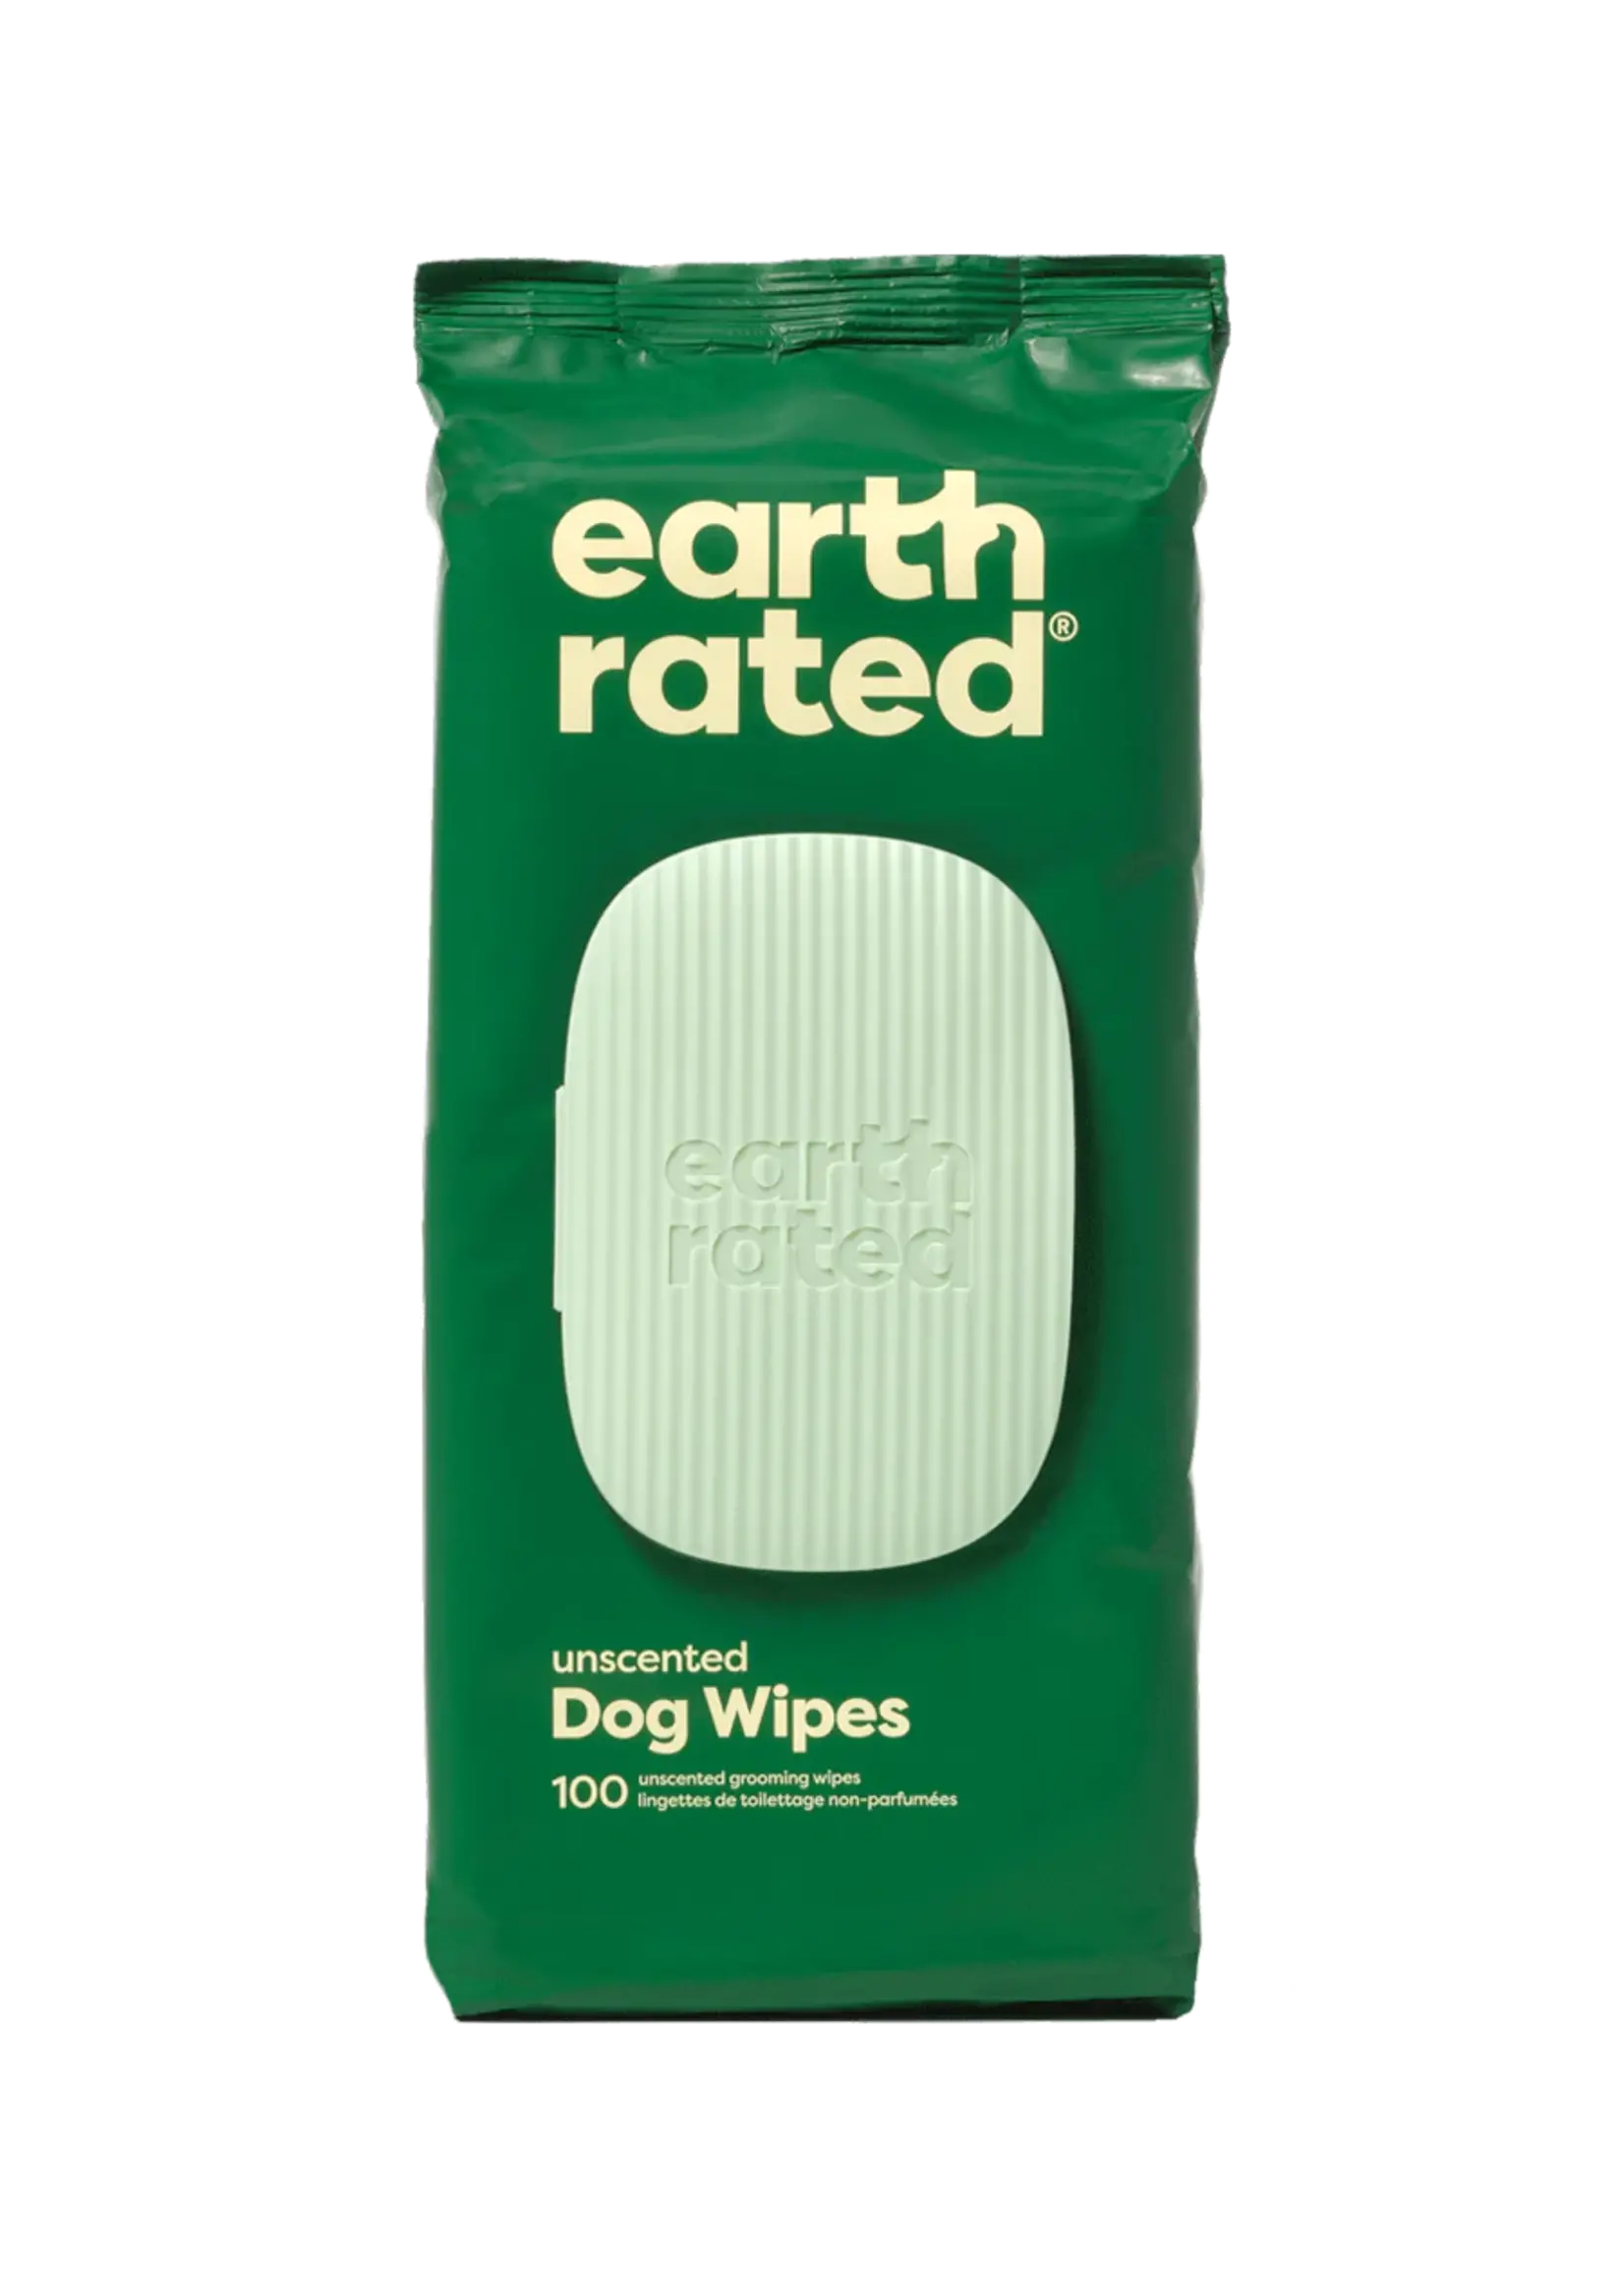 Earth Rated Earth Rated Plant-Based Dog Grooming Wipes